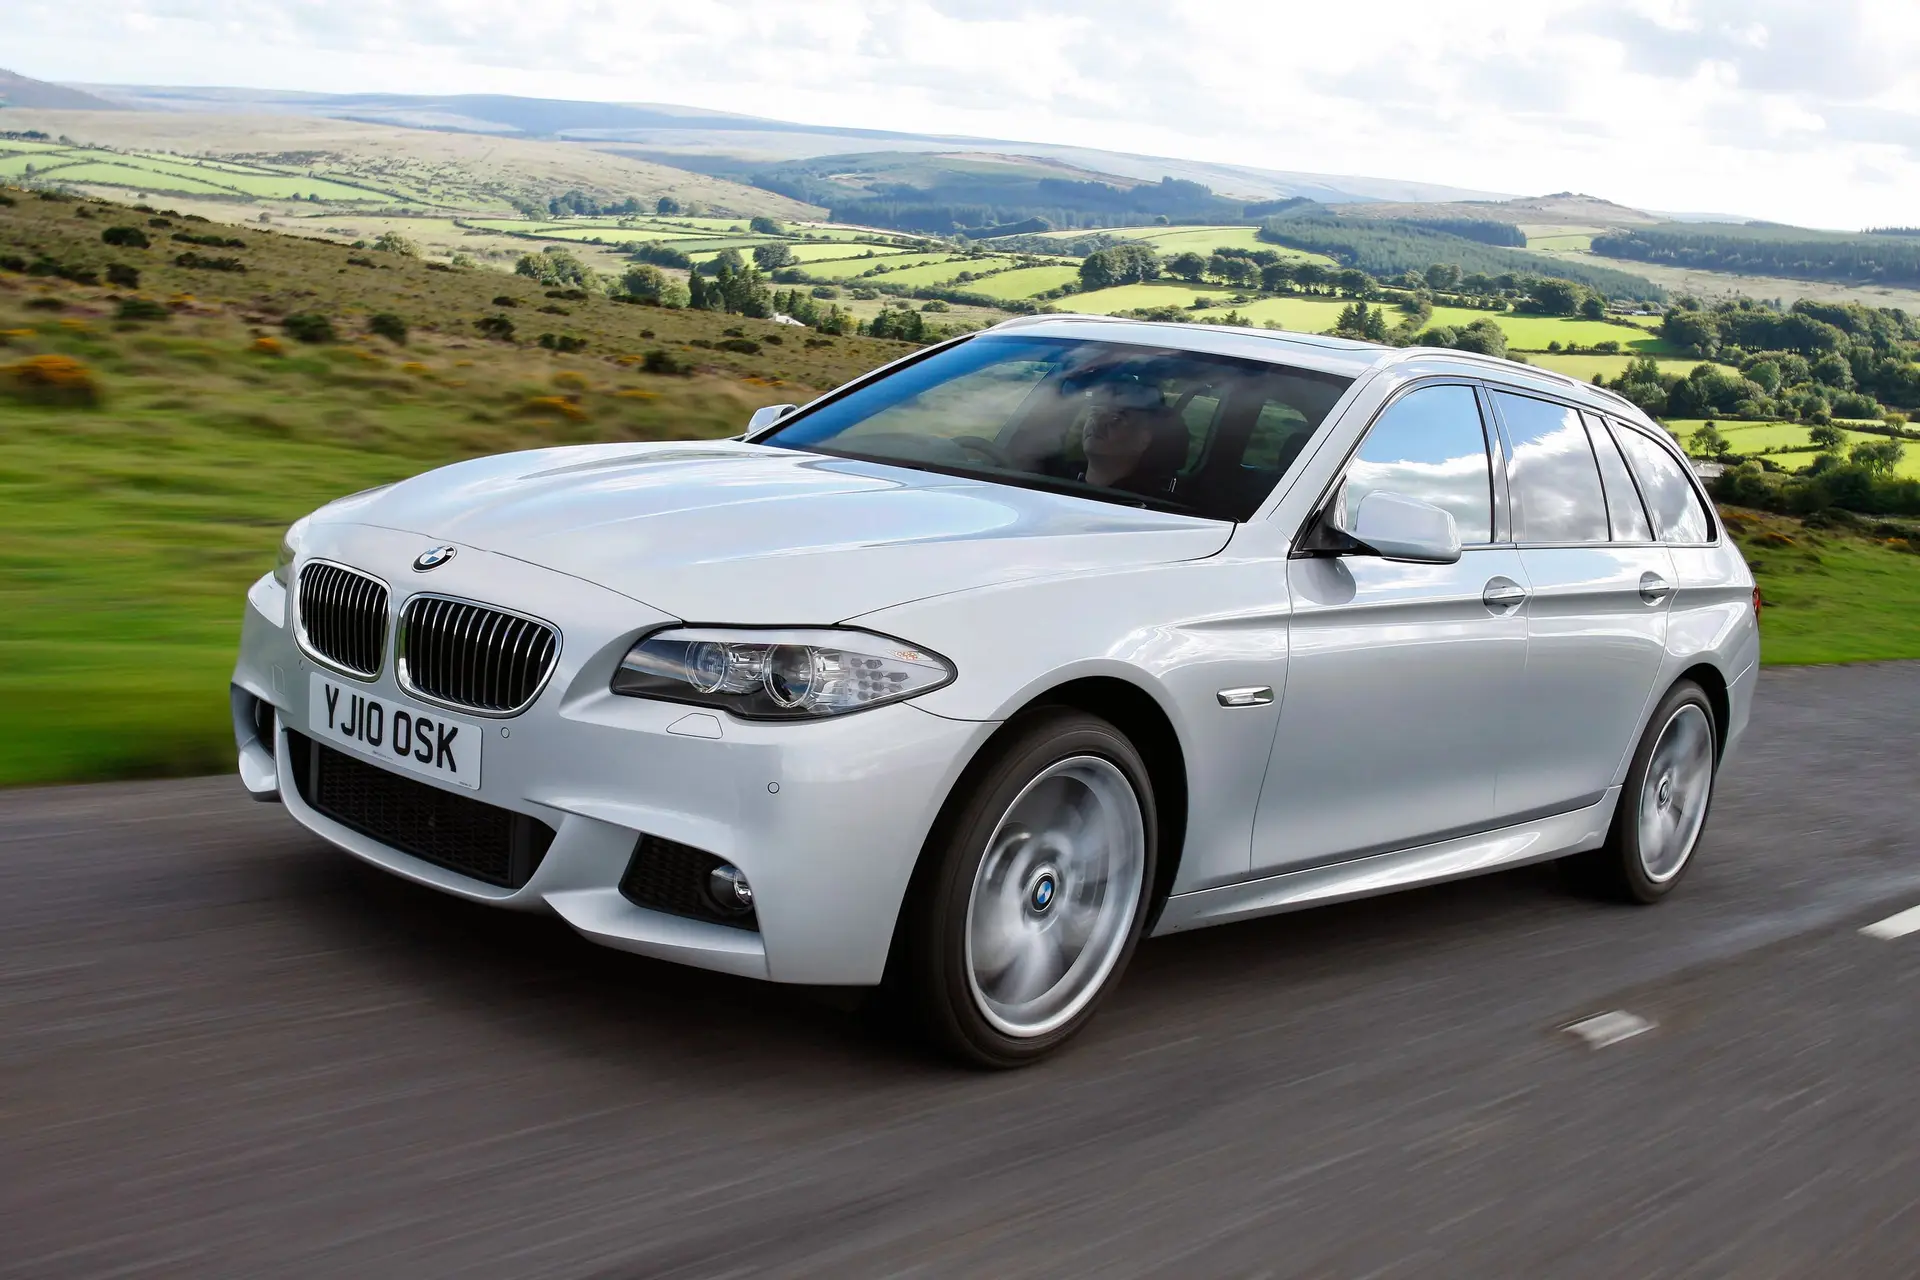 BMW 5 Series Touring (2010-2017) Review: Exterior front three quarter photo of the BMW 5 Series Touring on the road